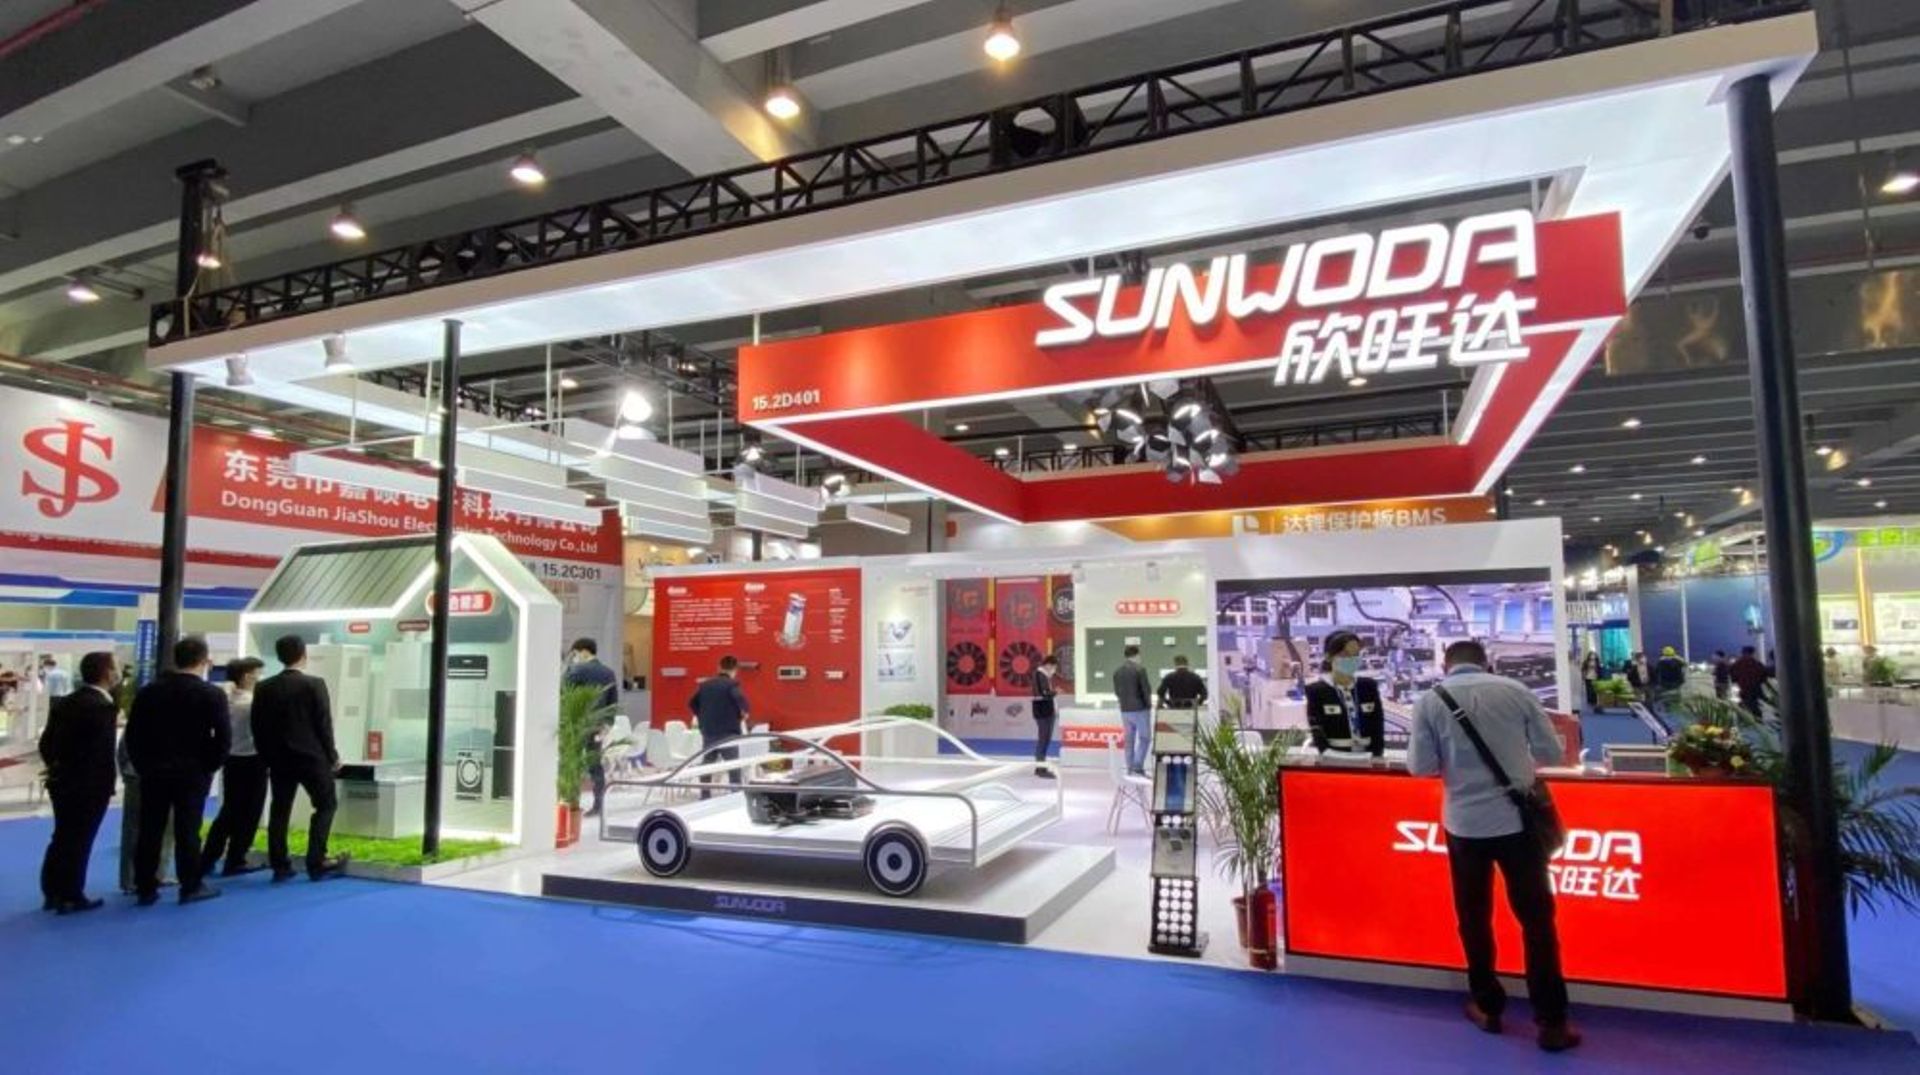 Sunwoda's EV battery unit rakes in 875m from food delivery giant